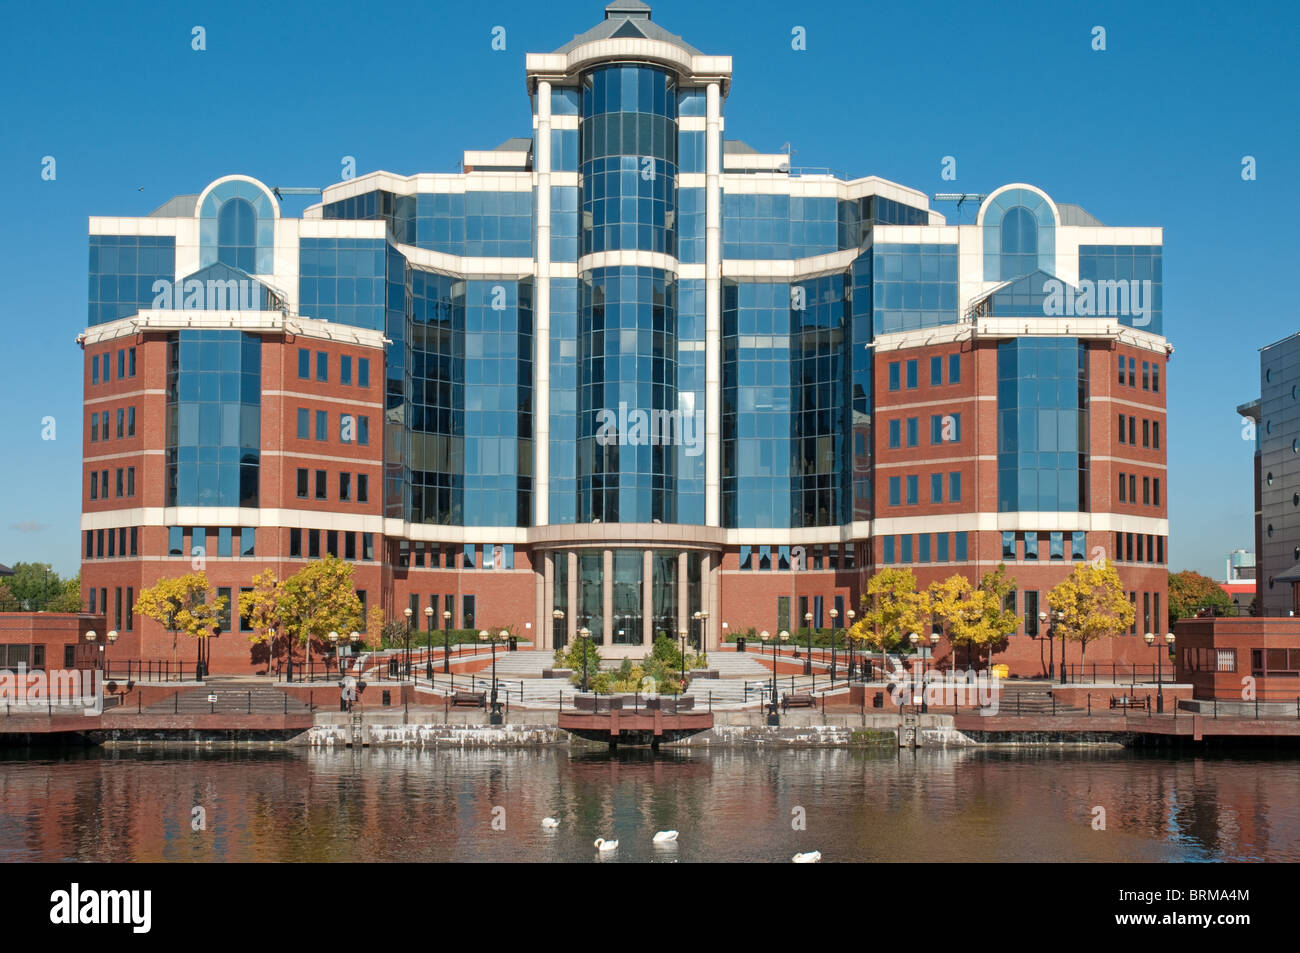 Victoria Harbour building, an office development at Erie Basin,Salford Quays owned by Peel Holdings. Stock Photo